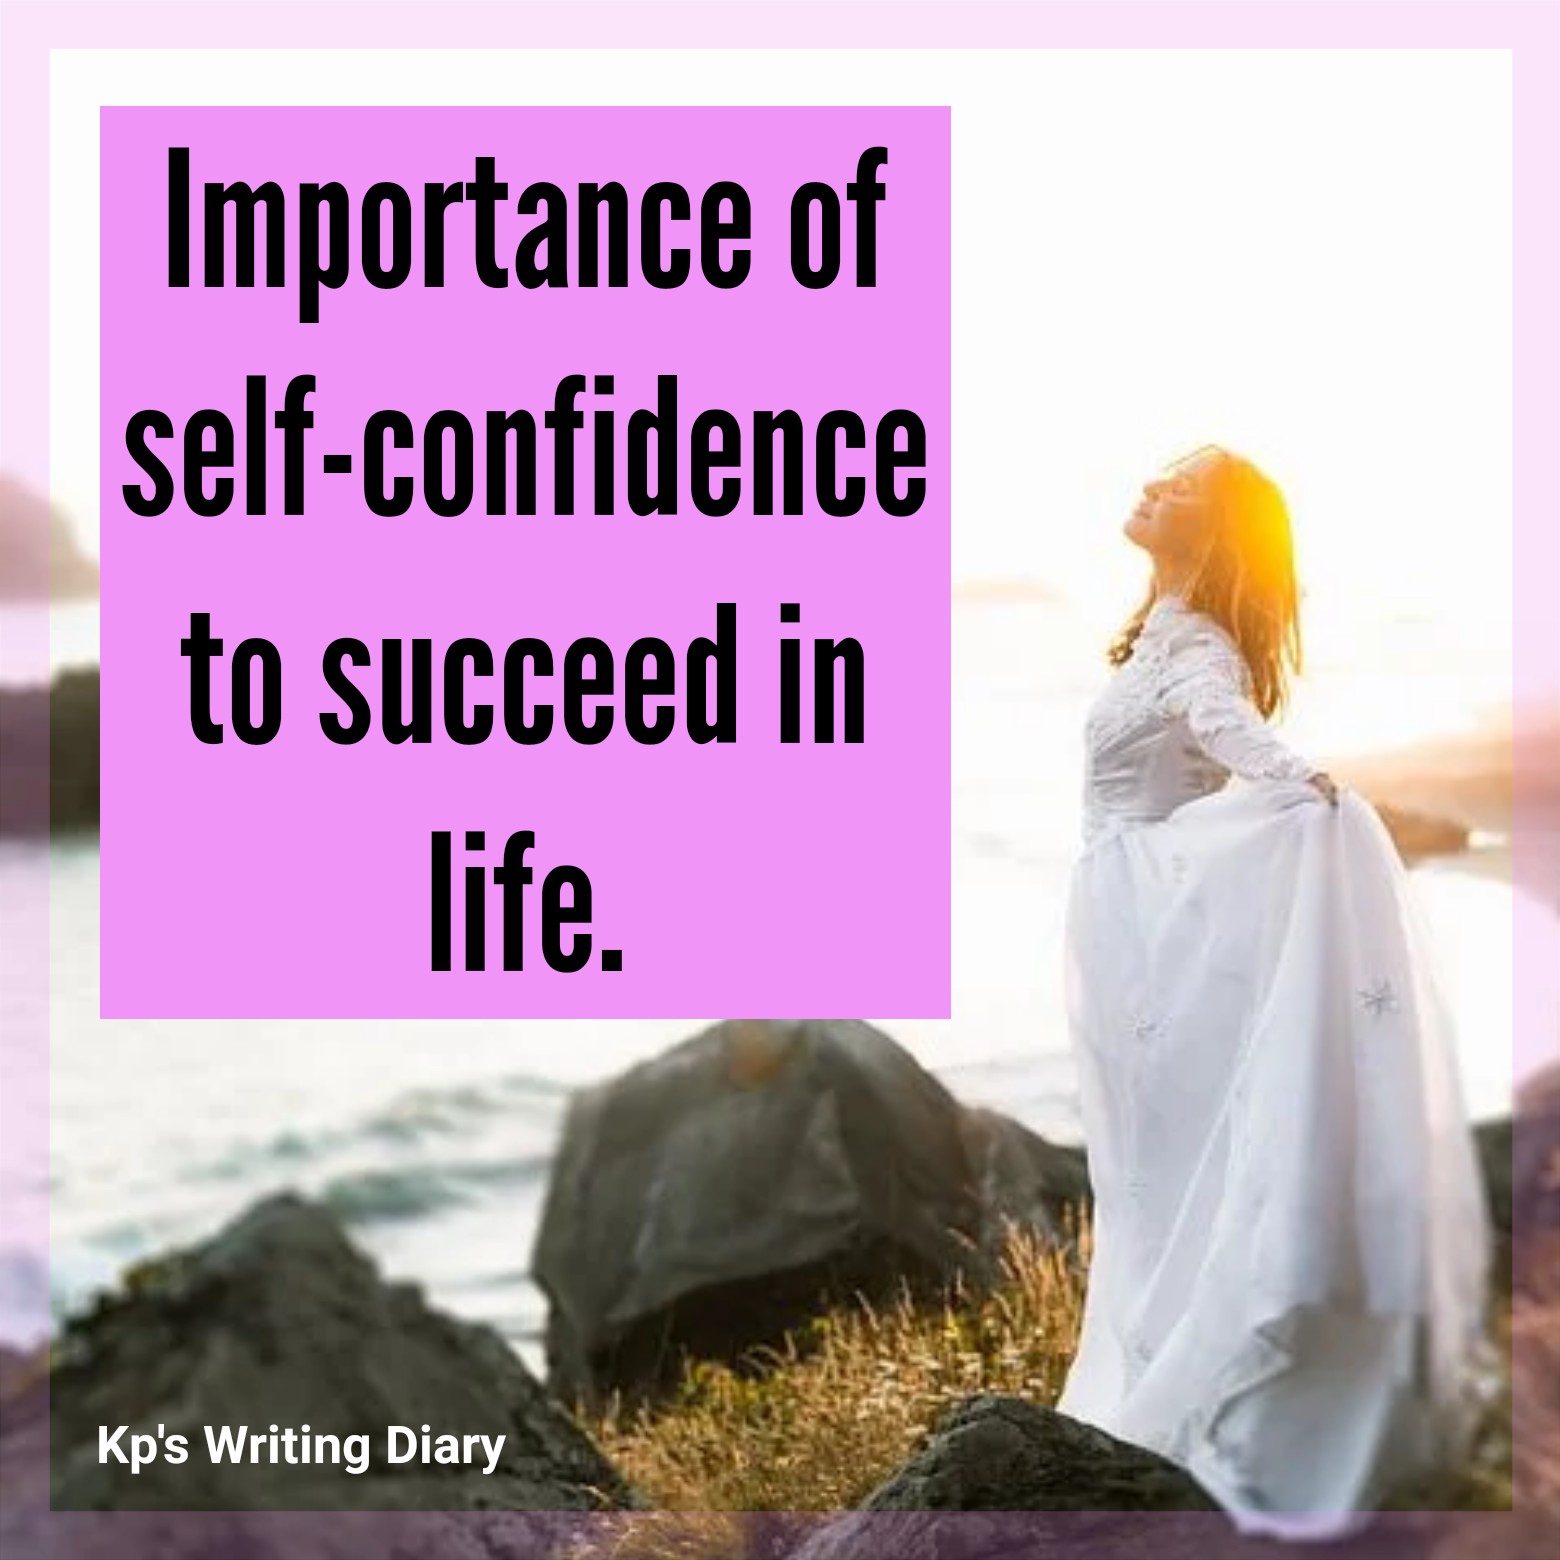 How self-confidence helps to succeed?